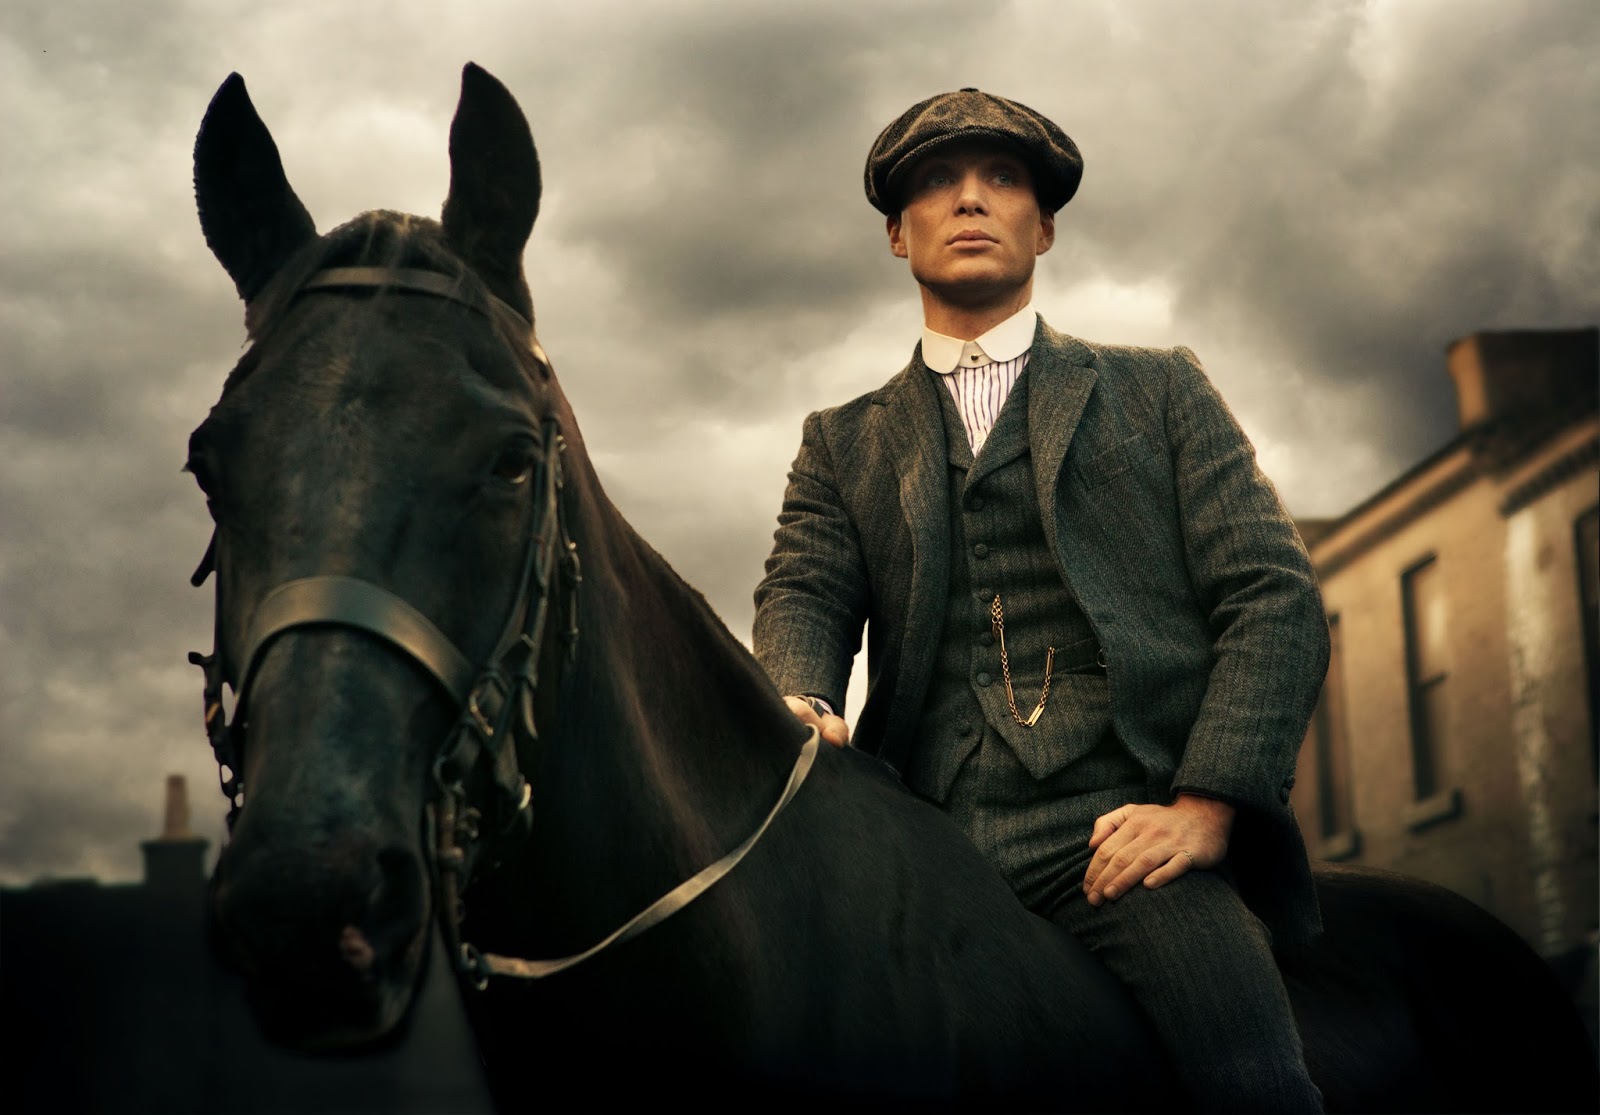 Where can I watch Peaky Blinders besides Netflix?